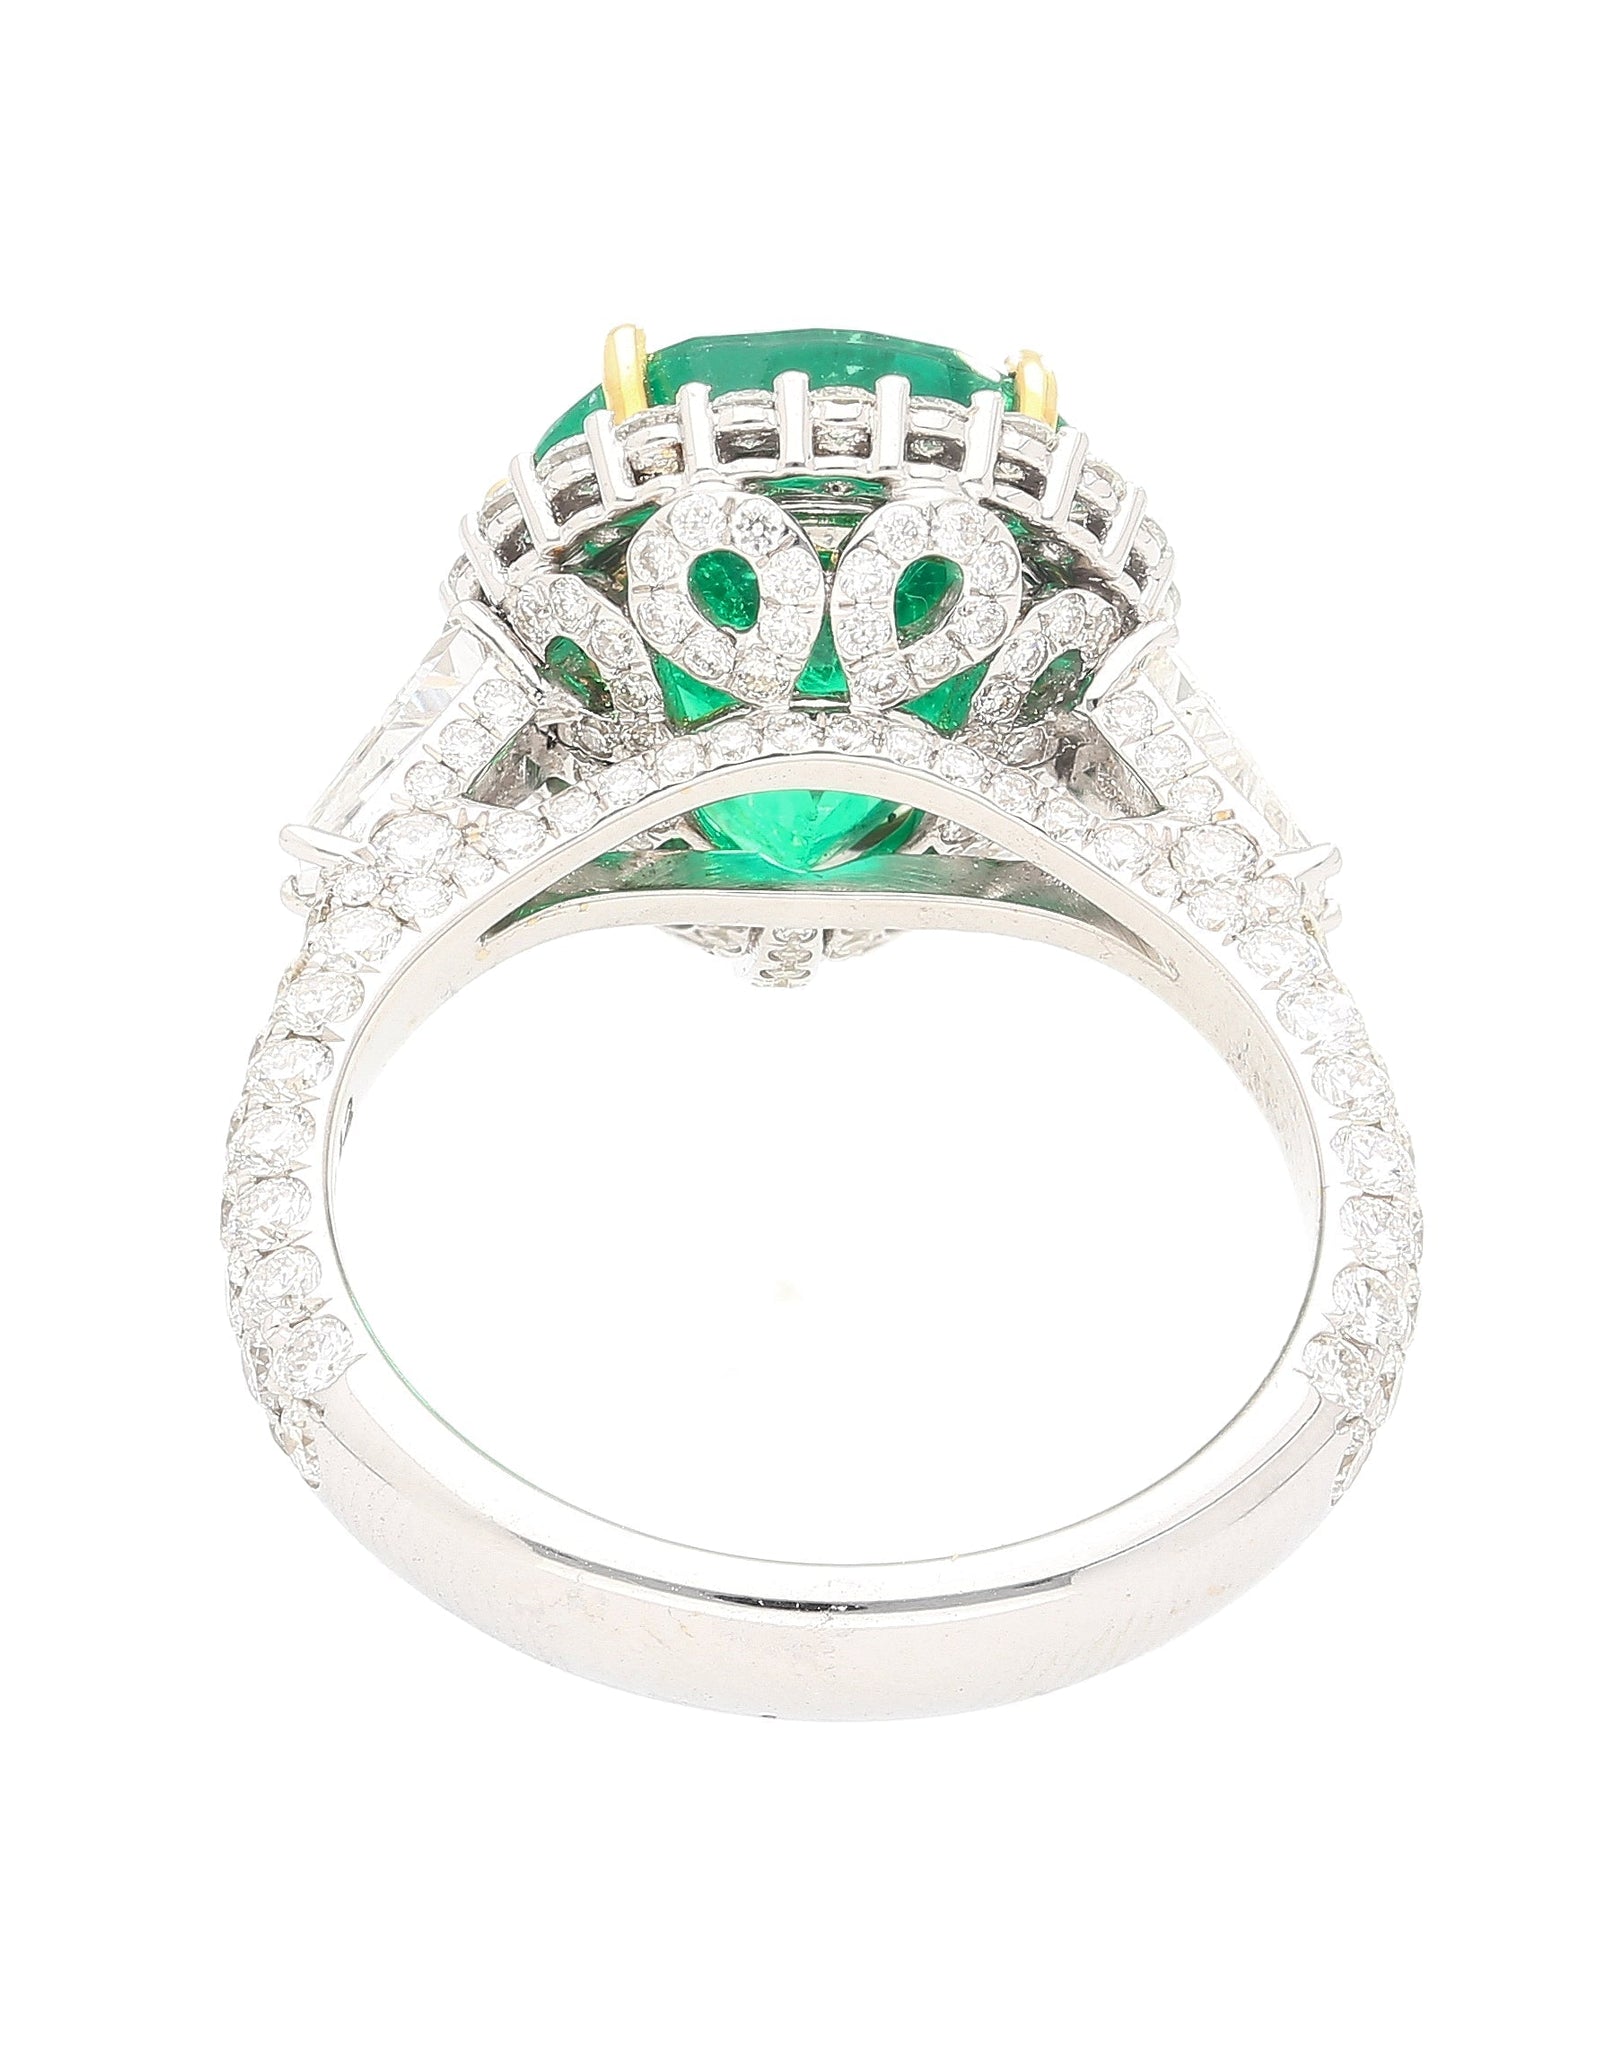 5.12 Carat Pear Cut Colombian Emerald Ring with Baguette Diamond Sides in 18K Gold